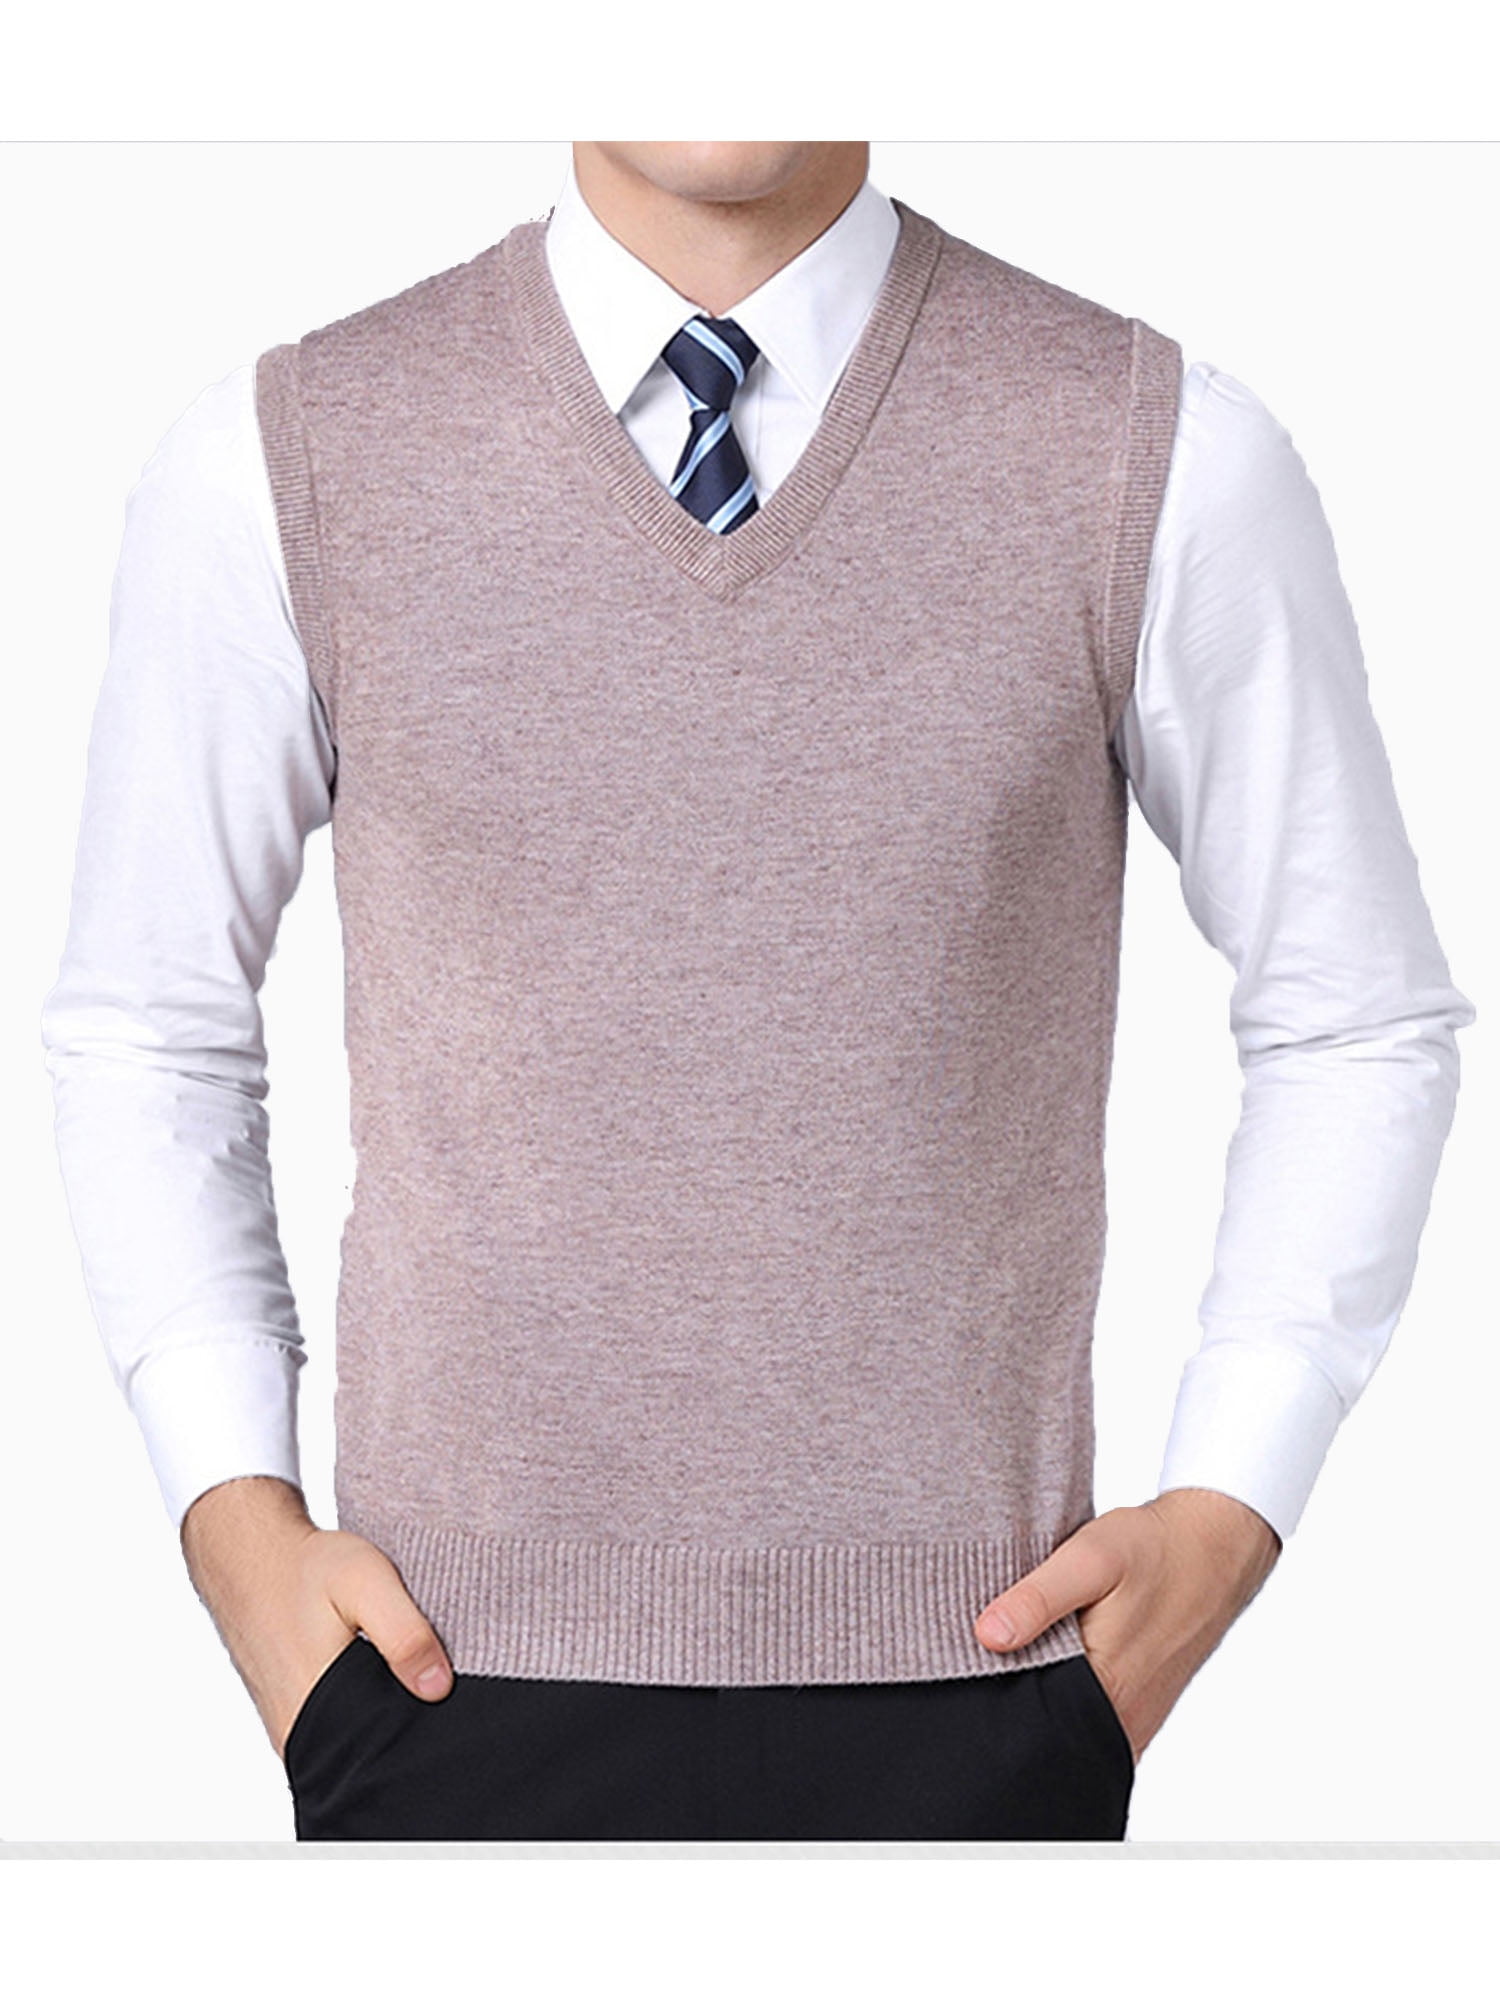 Gihuo Mens Casual V-Neck Cashmere Wool Blend Slim Fit Pullover Sweater Vests 